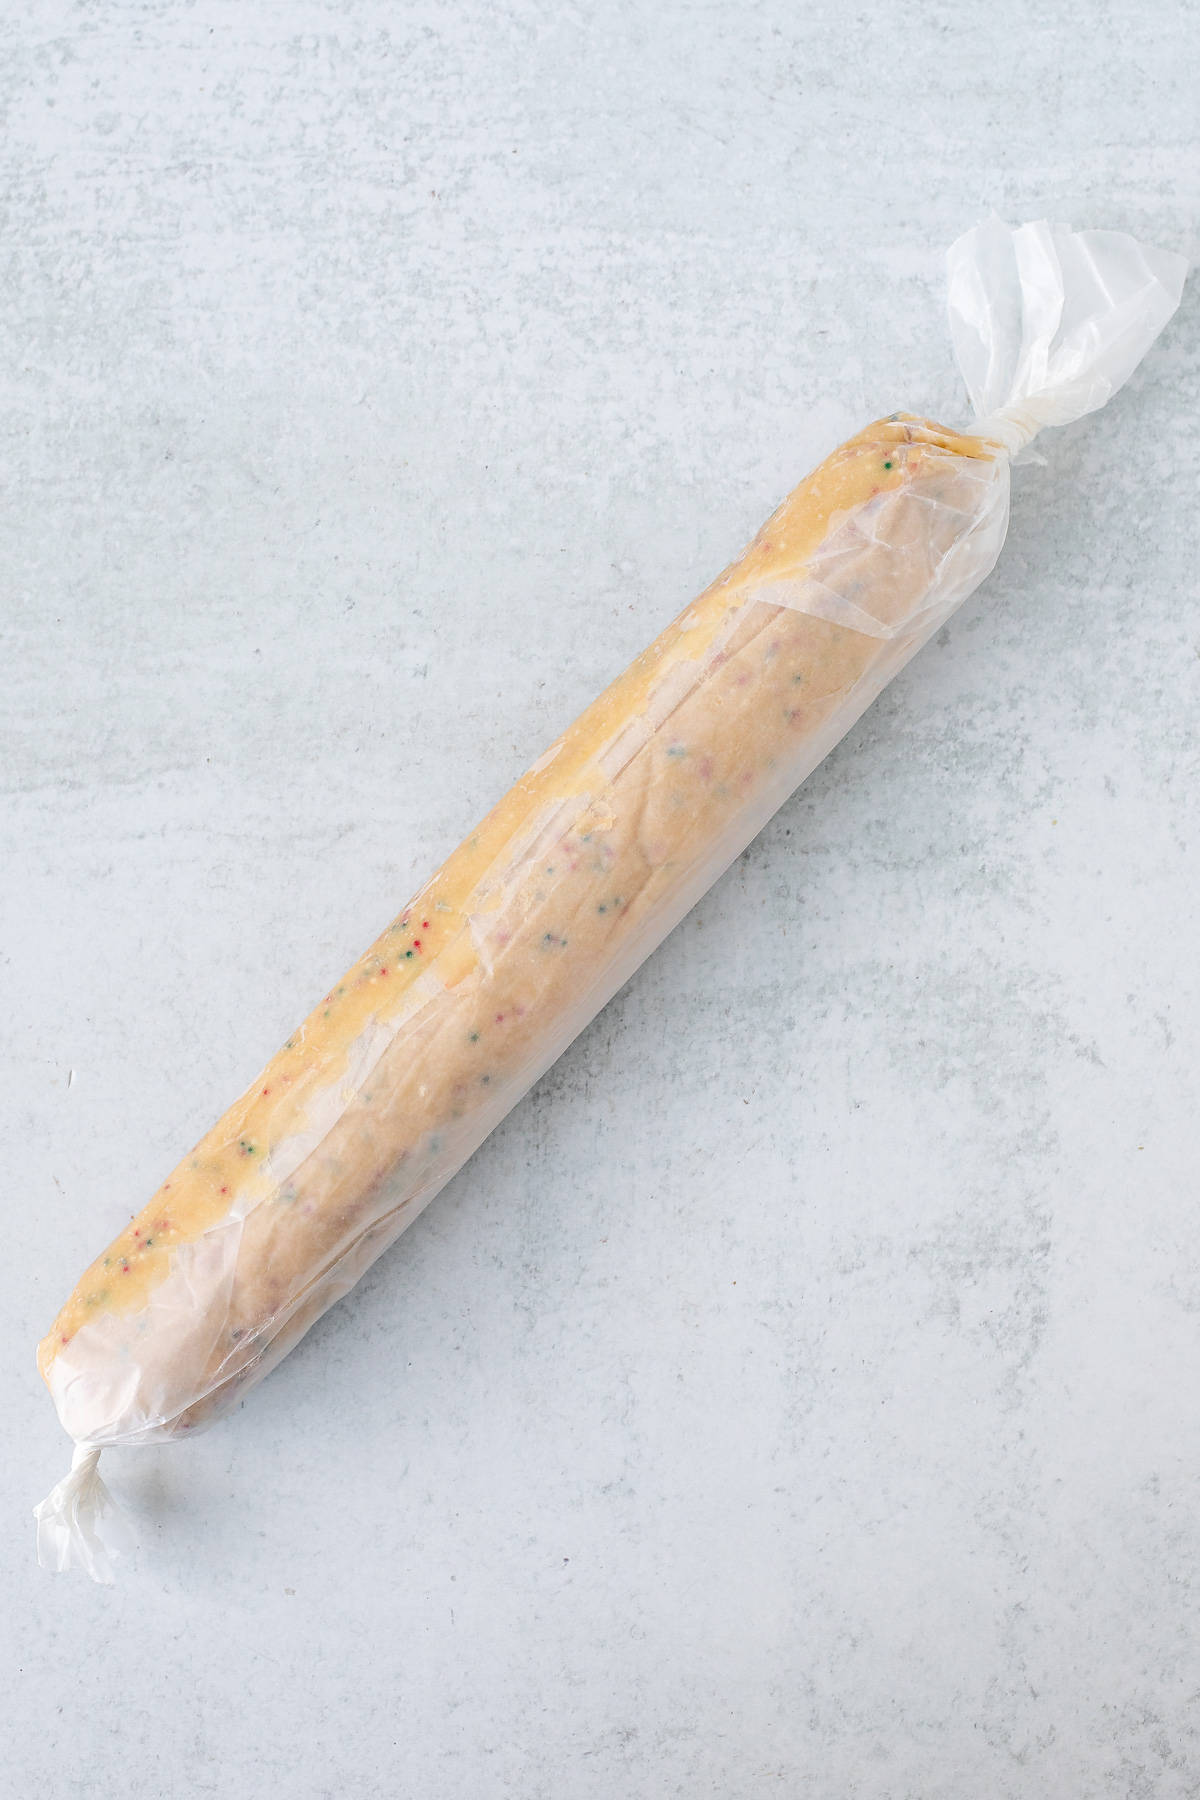 Cookie dough log wrapped in wax paper with the ends twisted